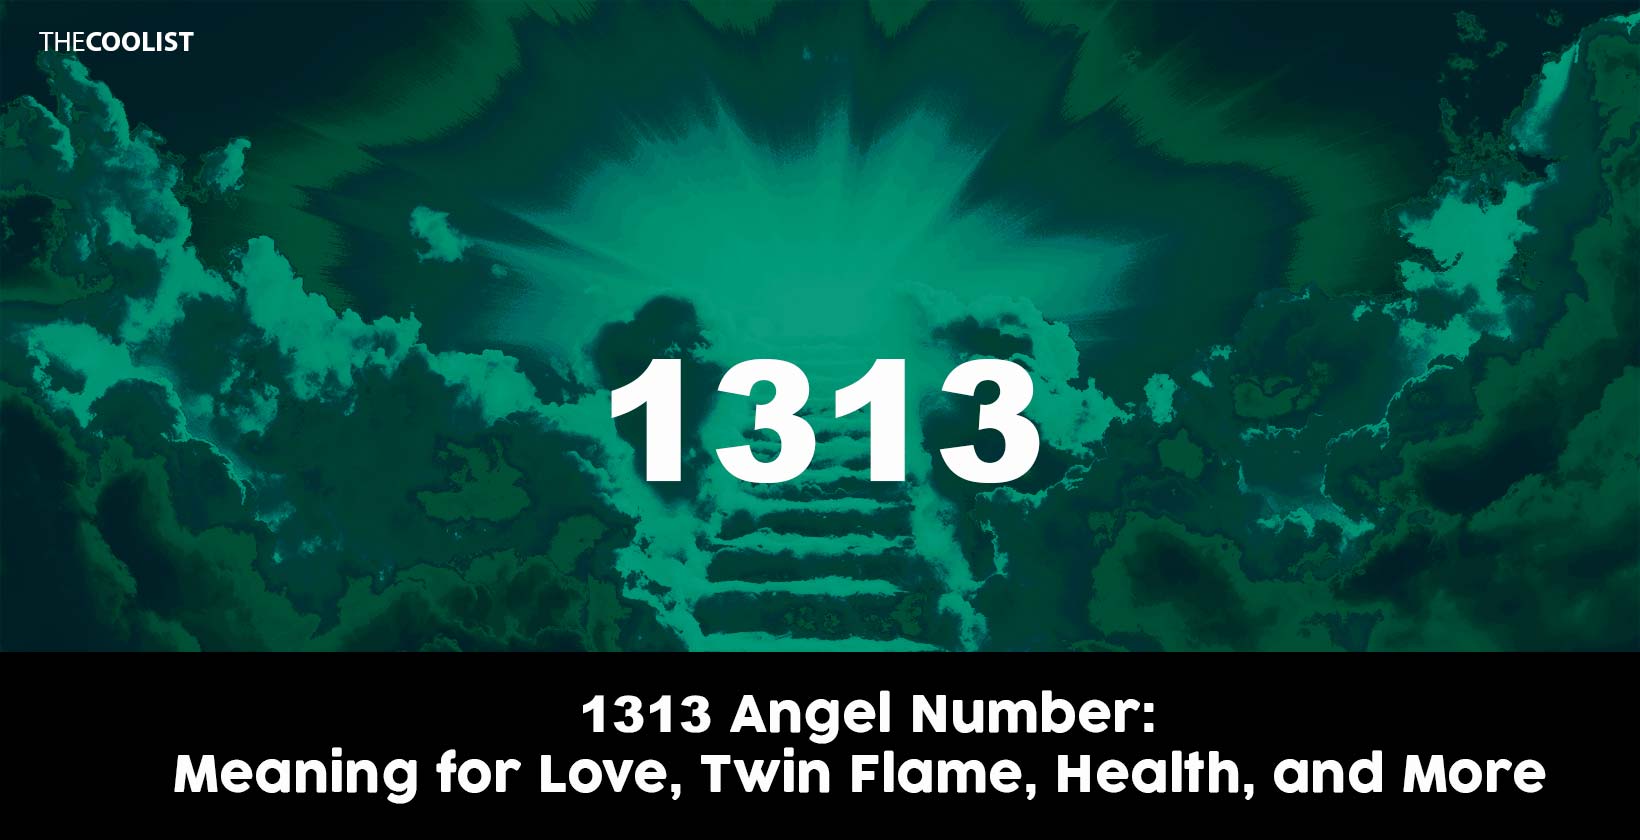 1313 Angel Number: Meaning for Love, Twin Flame, Health, and More